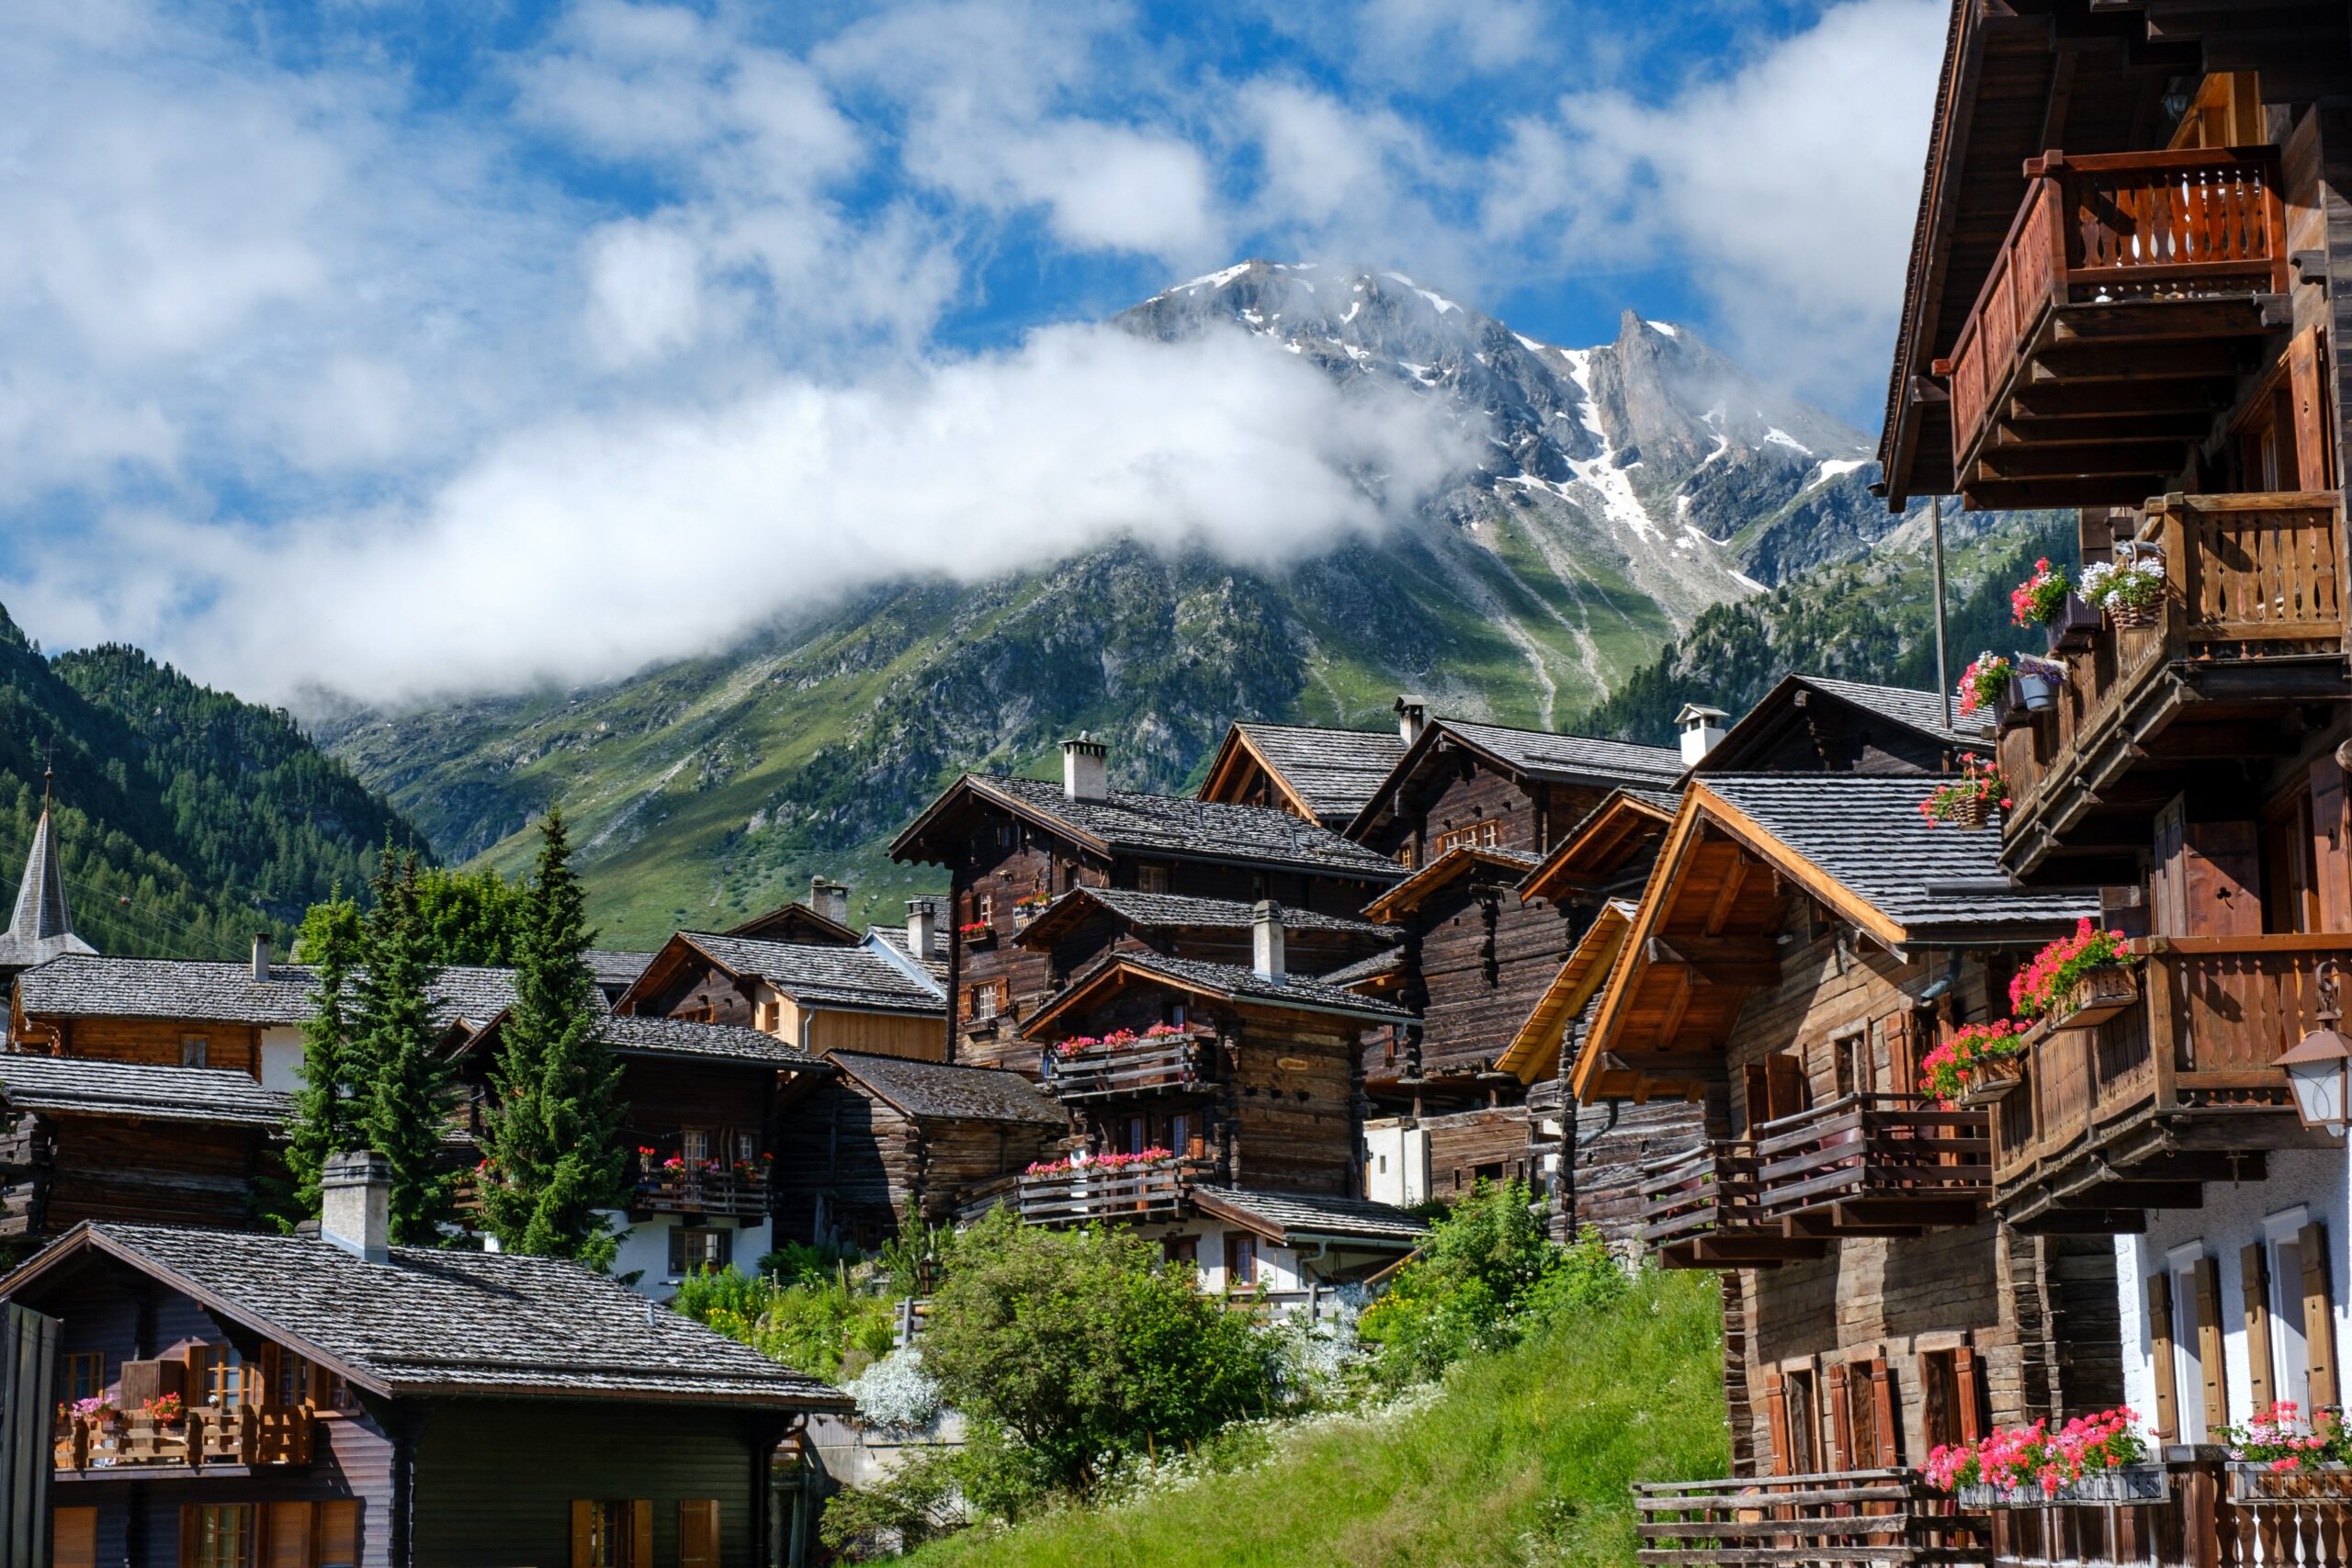 Traditionnal wooden houses in the mountains in Switzerland during summer